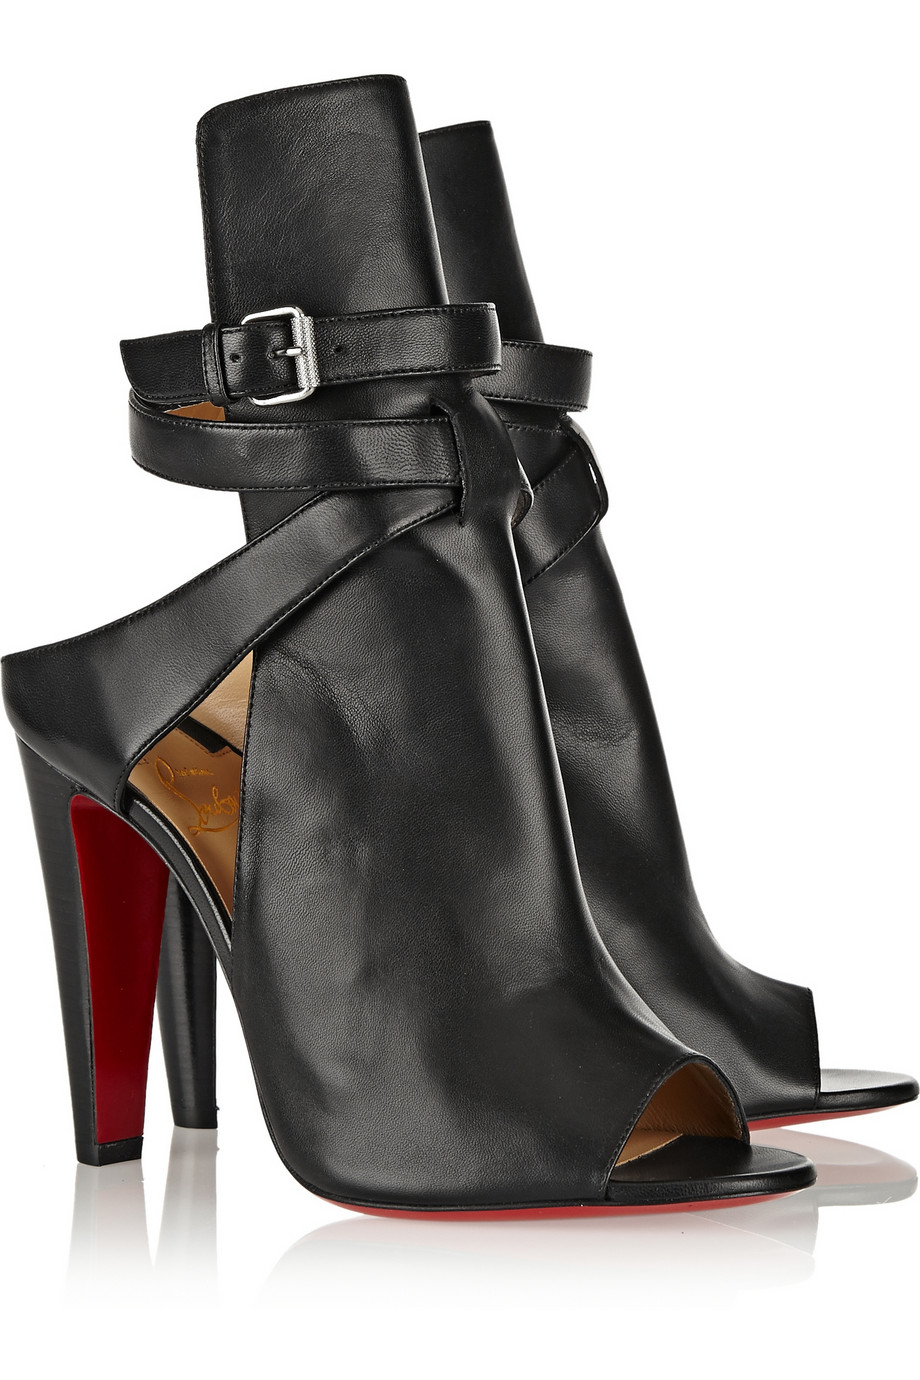 Christian Louboutin Hippik 100 Cutout Leather Ankle Boots in Black - Lyst